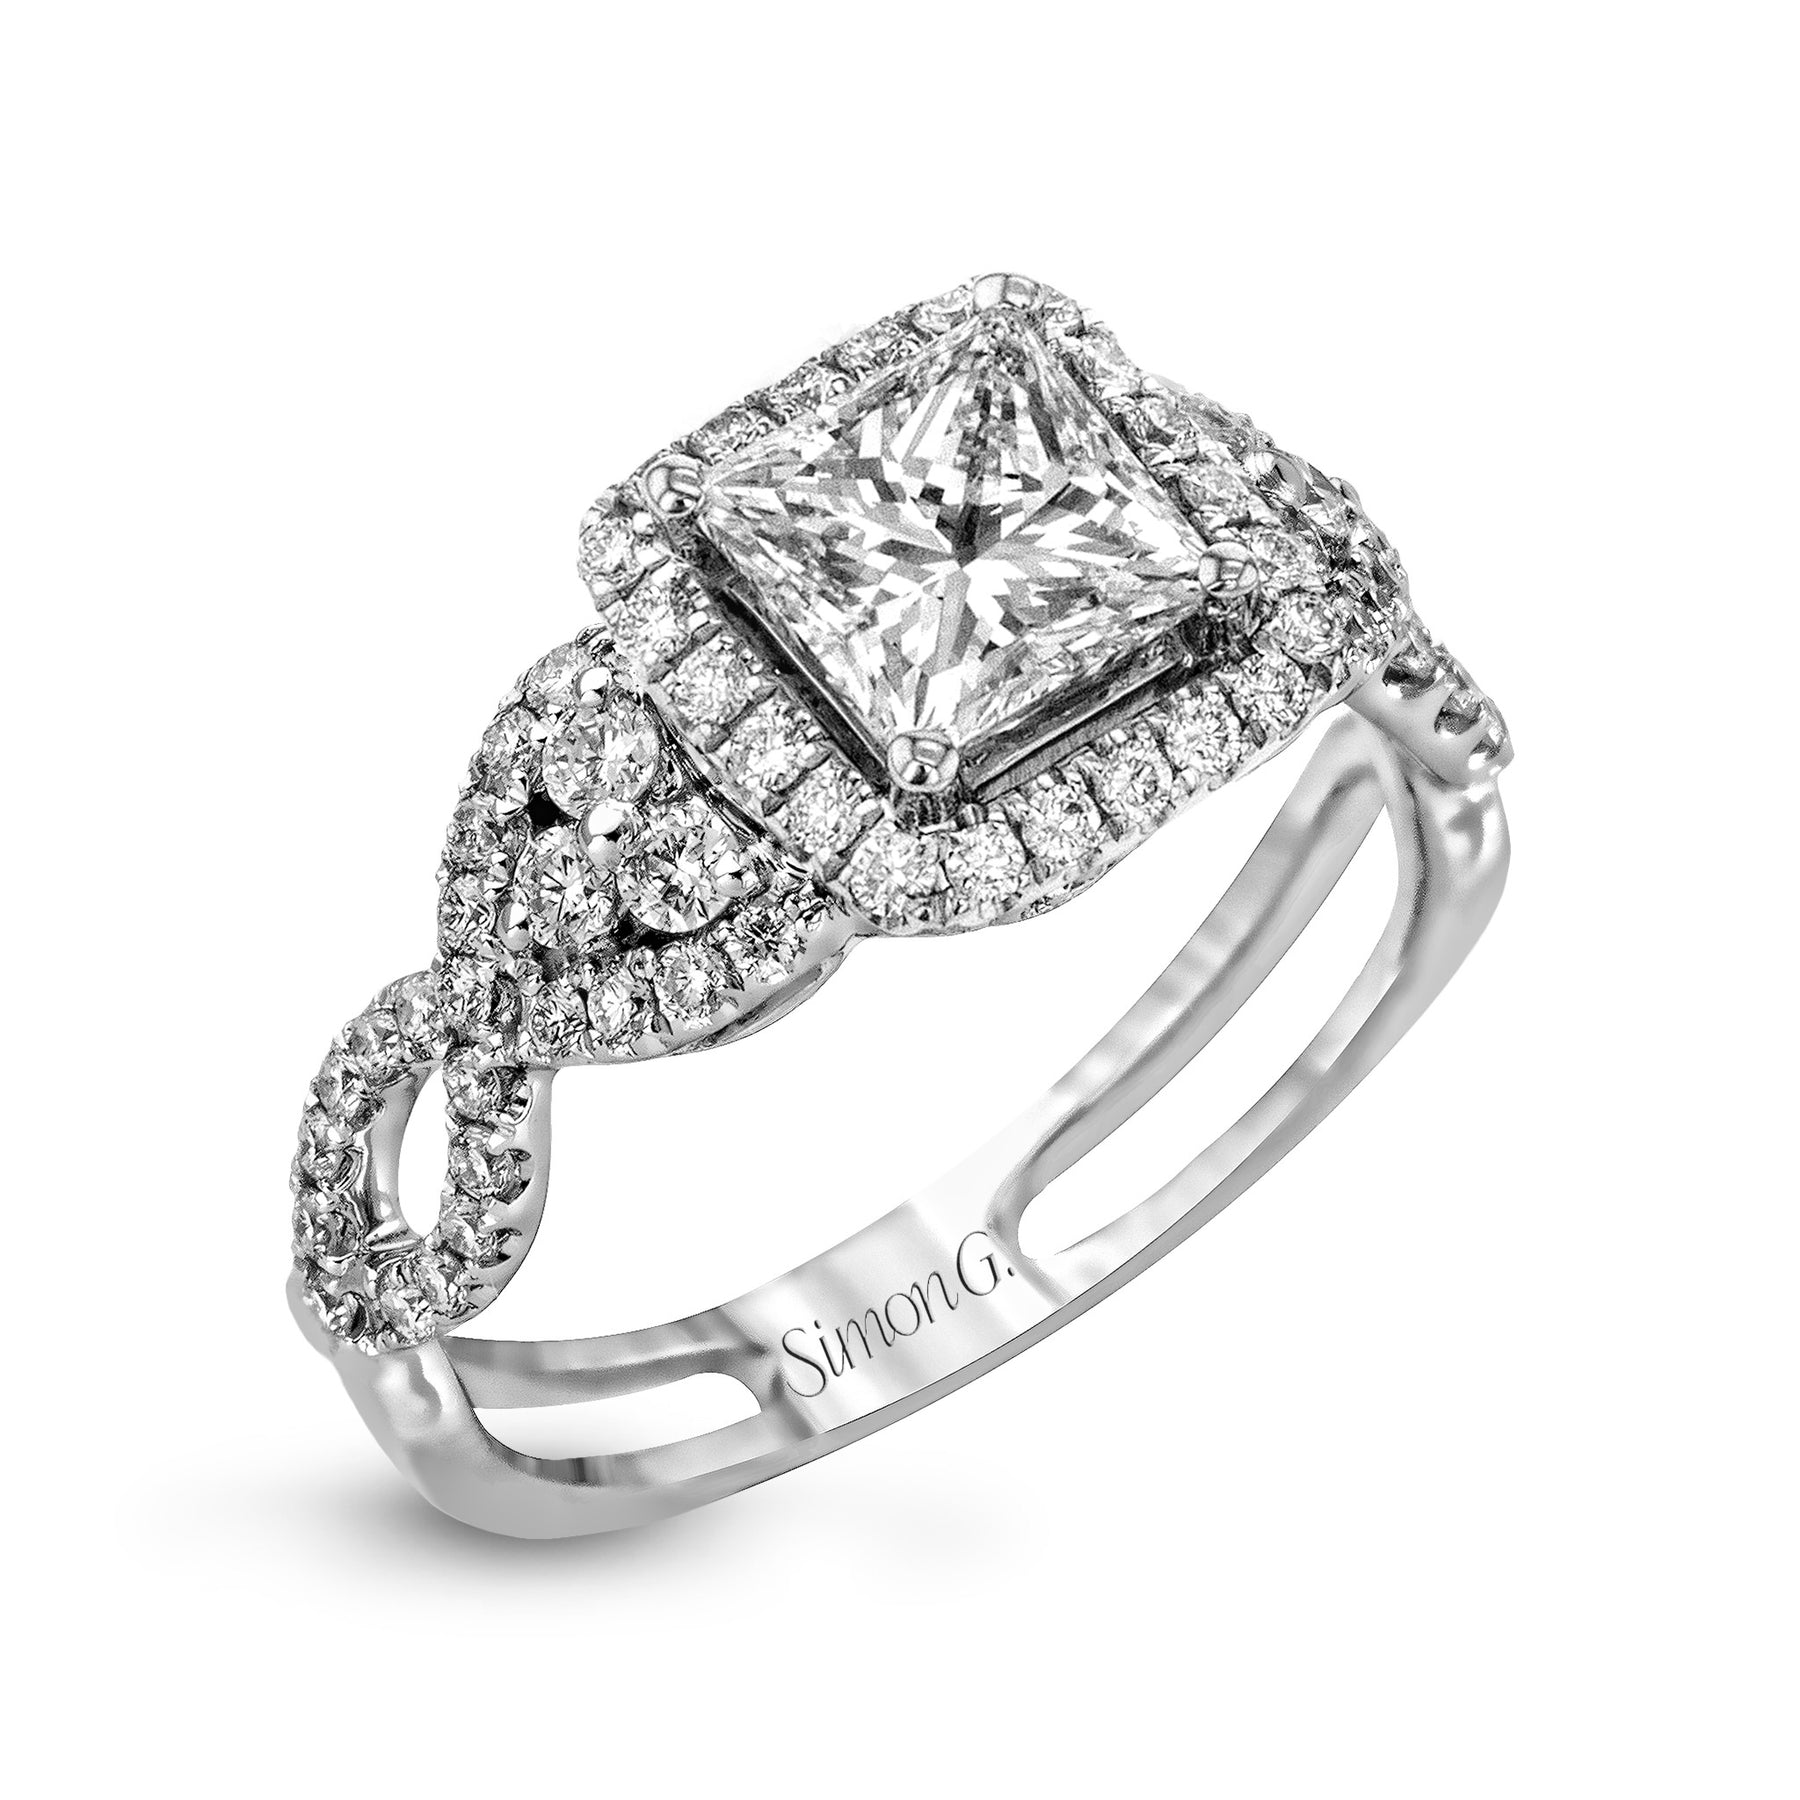 Princess-Cut Halo Engagement Ring In 18k Gold With Diamonds TR160-PC